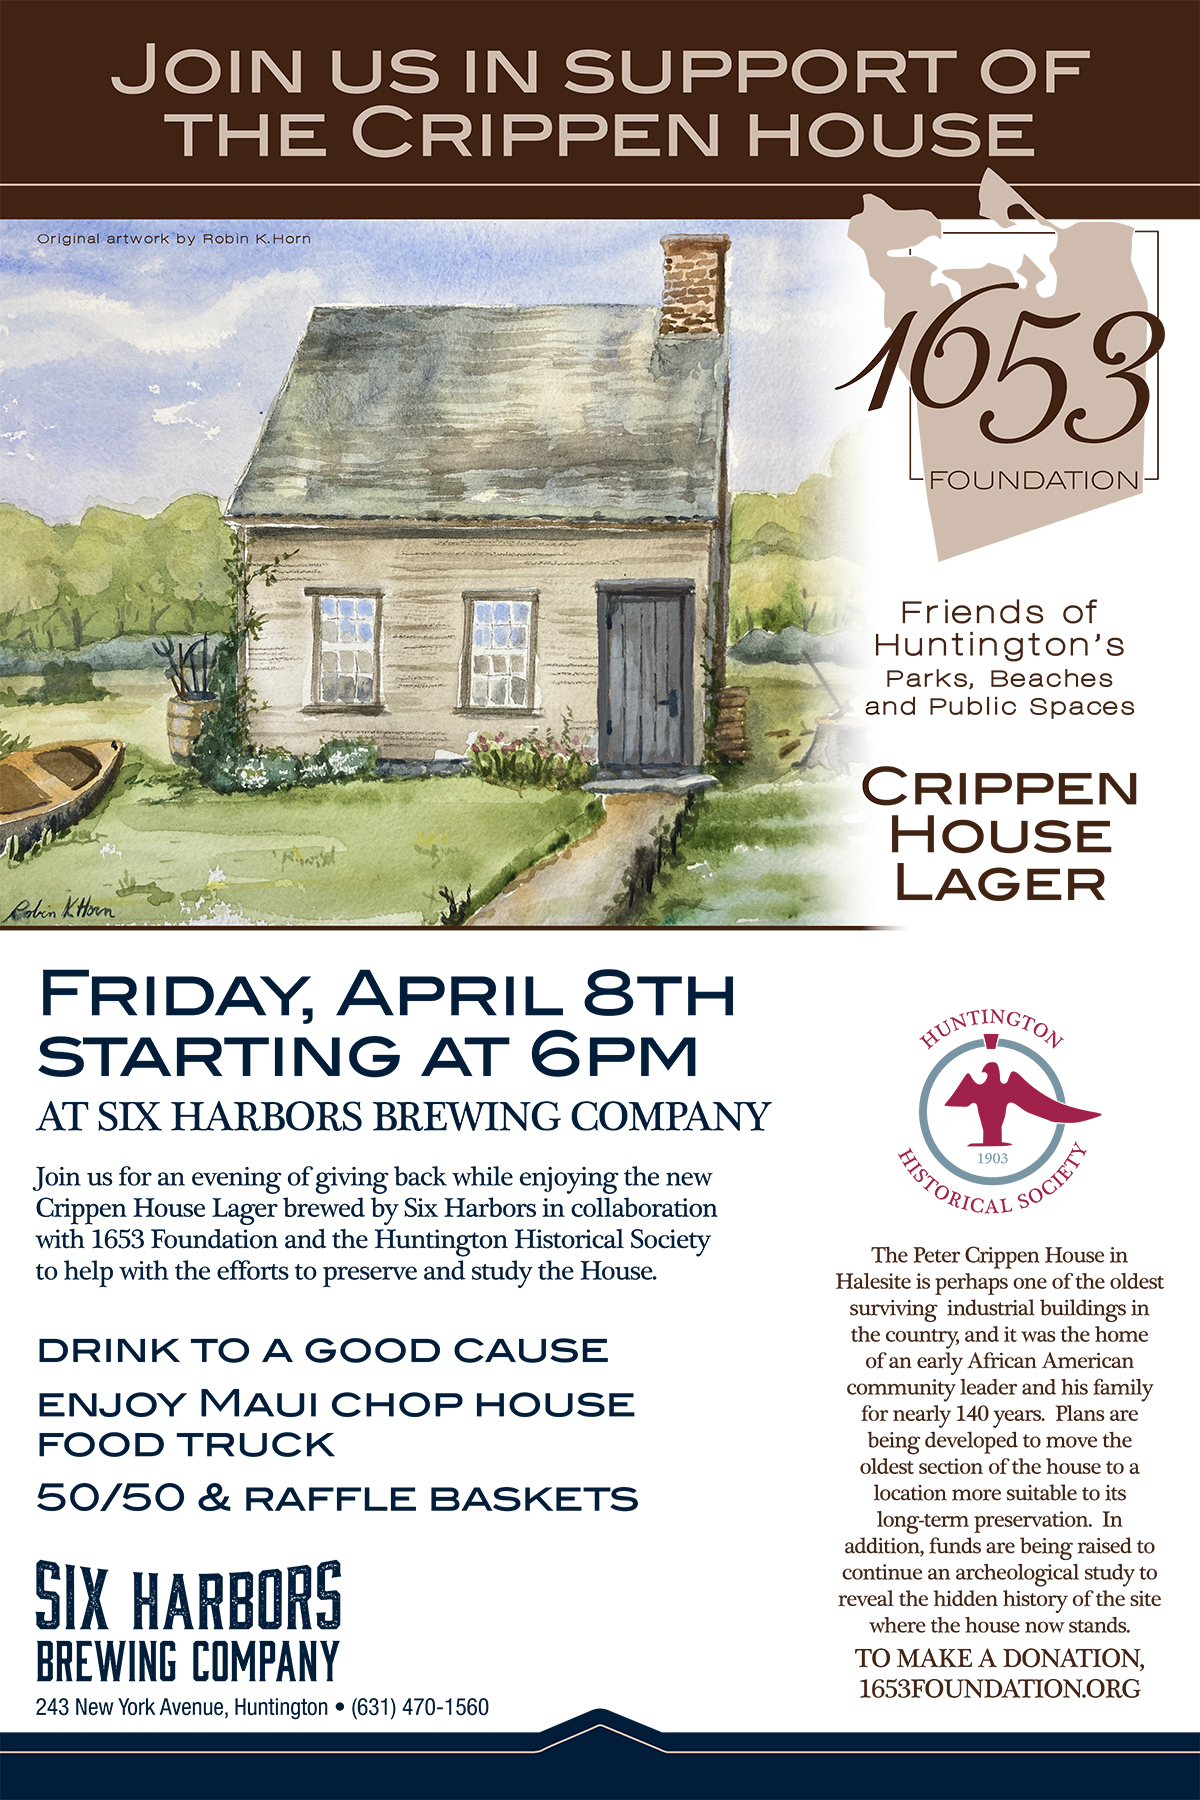 Friday, April 8th starting at 6pm AT SIX HARBORS BREWING COMPANY Join us for an evening of giving back while enjoying the new Crippen House Lager brewed by Six Harbors in collaboration with 1653 Foundation and the Huntington Historical Society to help with the efforts to preserve and study the House.